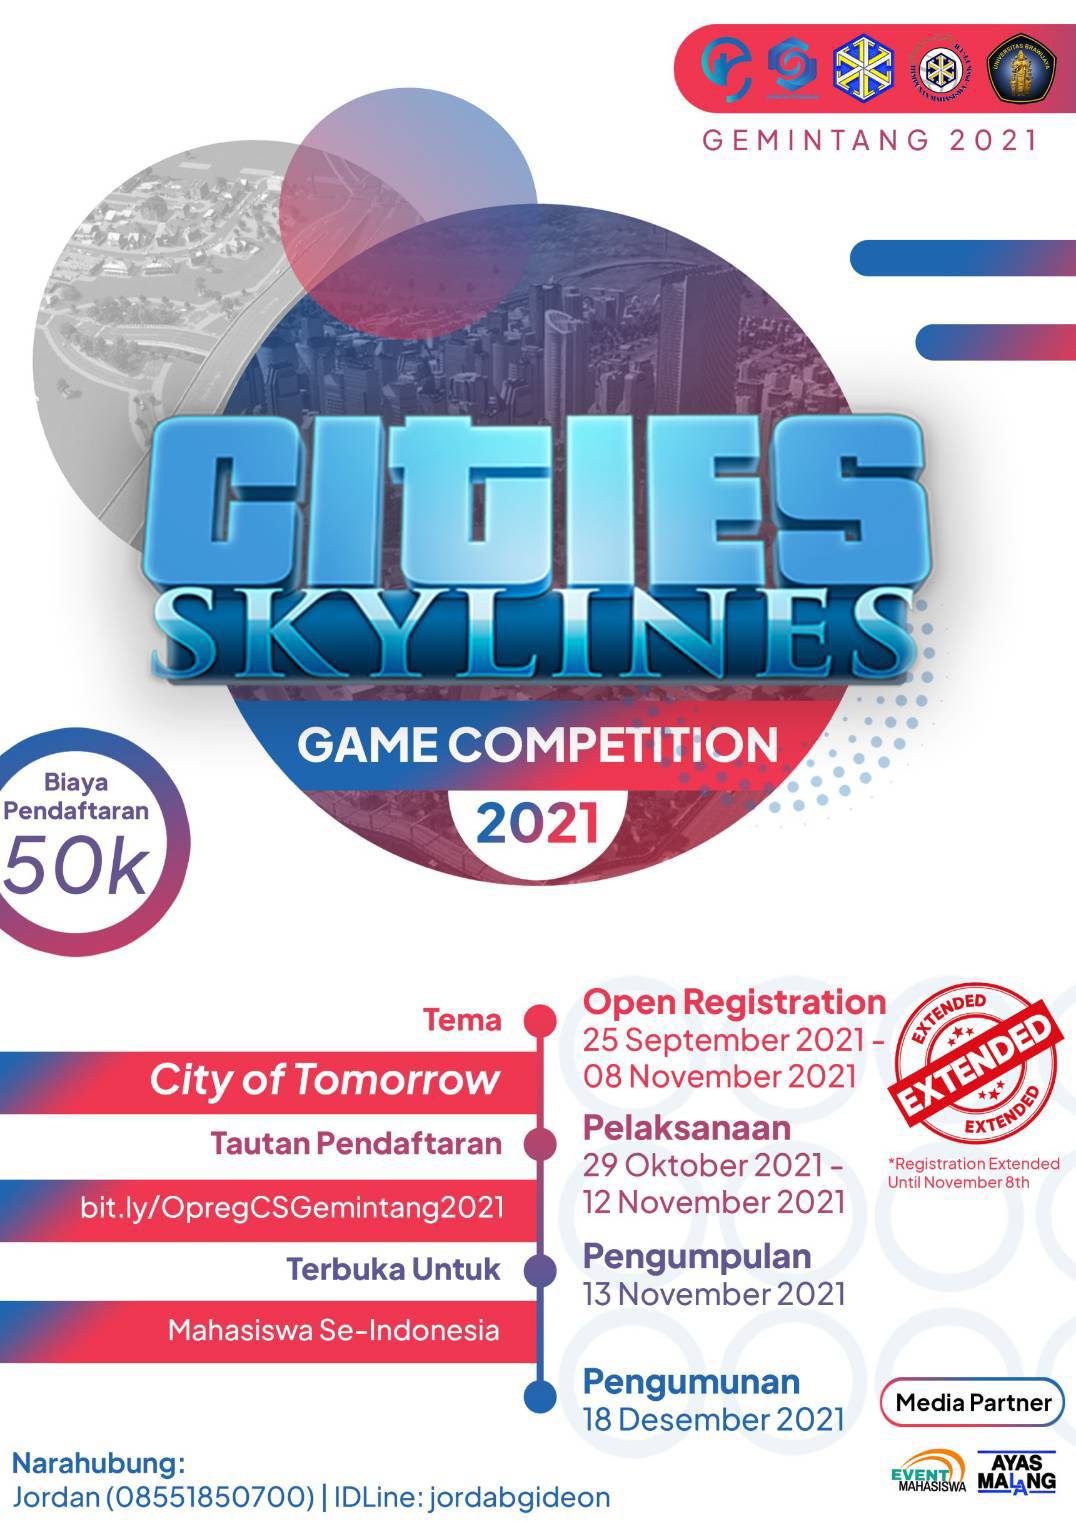 Gemintang 2021 Game Competition